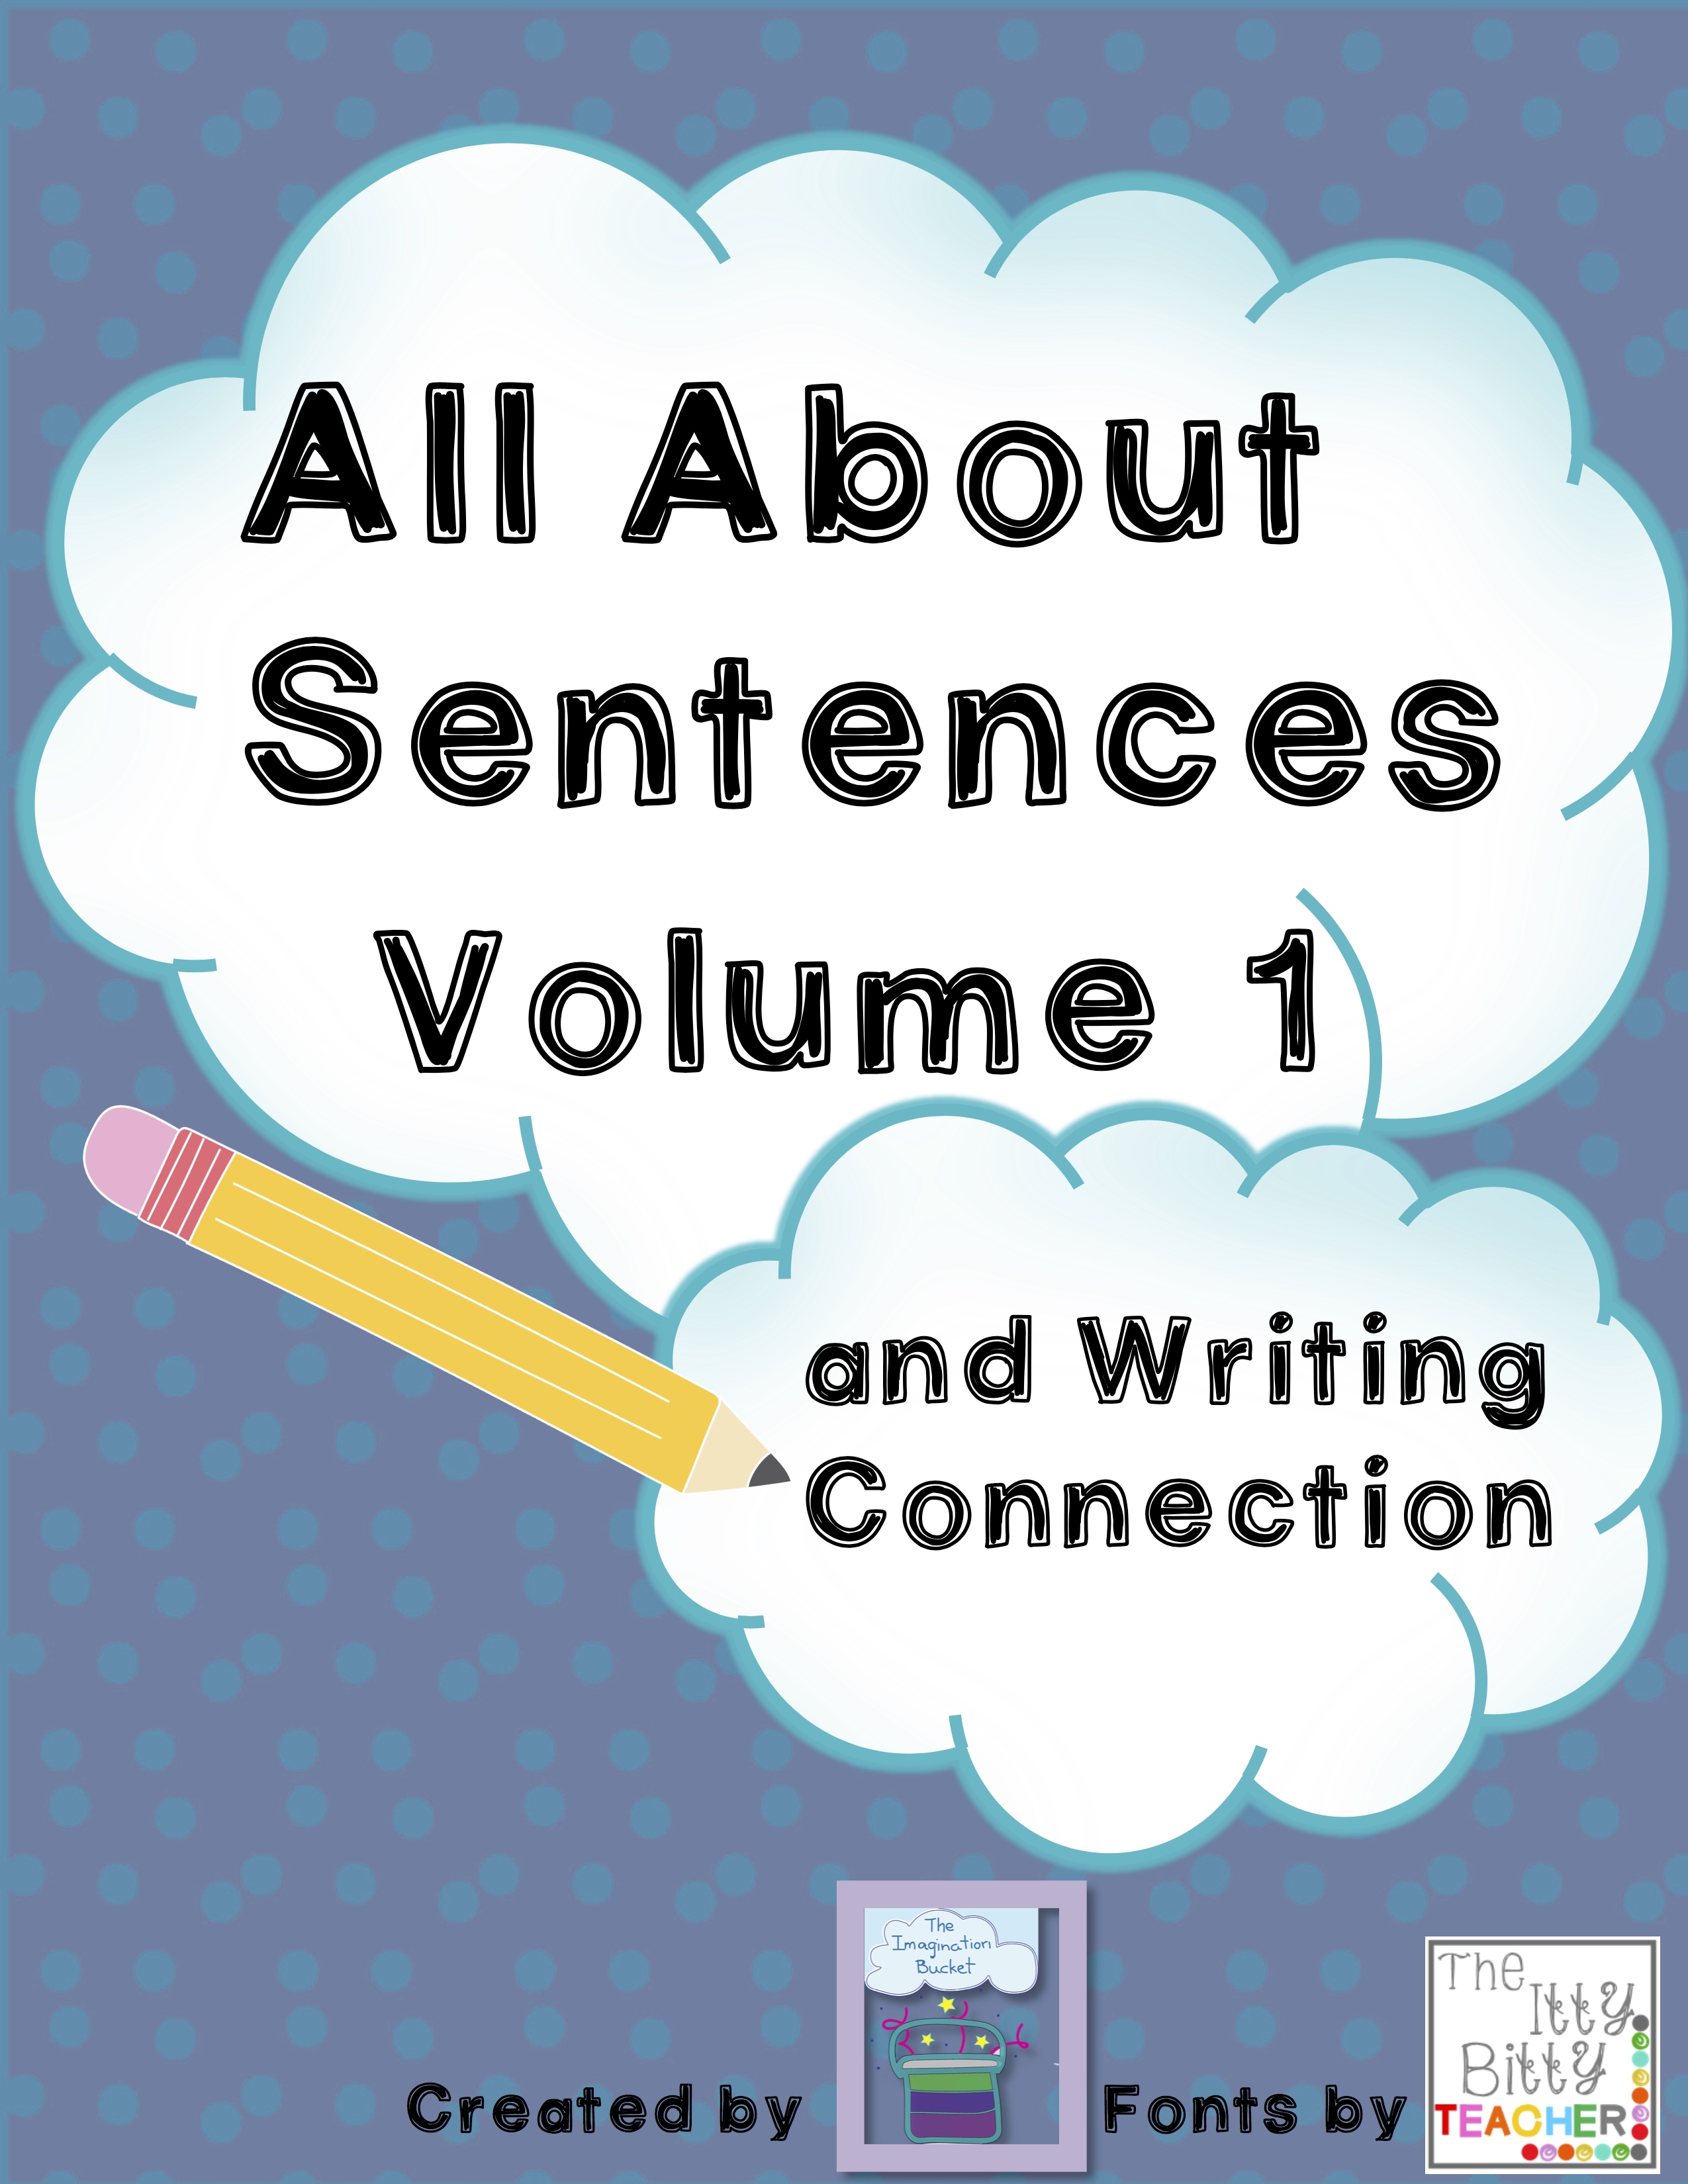 All About Sentences Volume 1